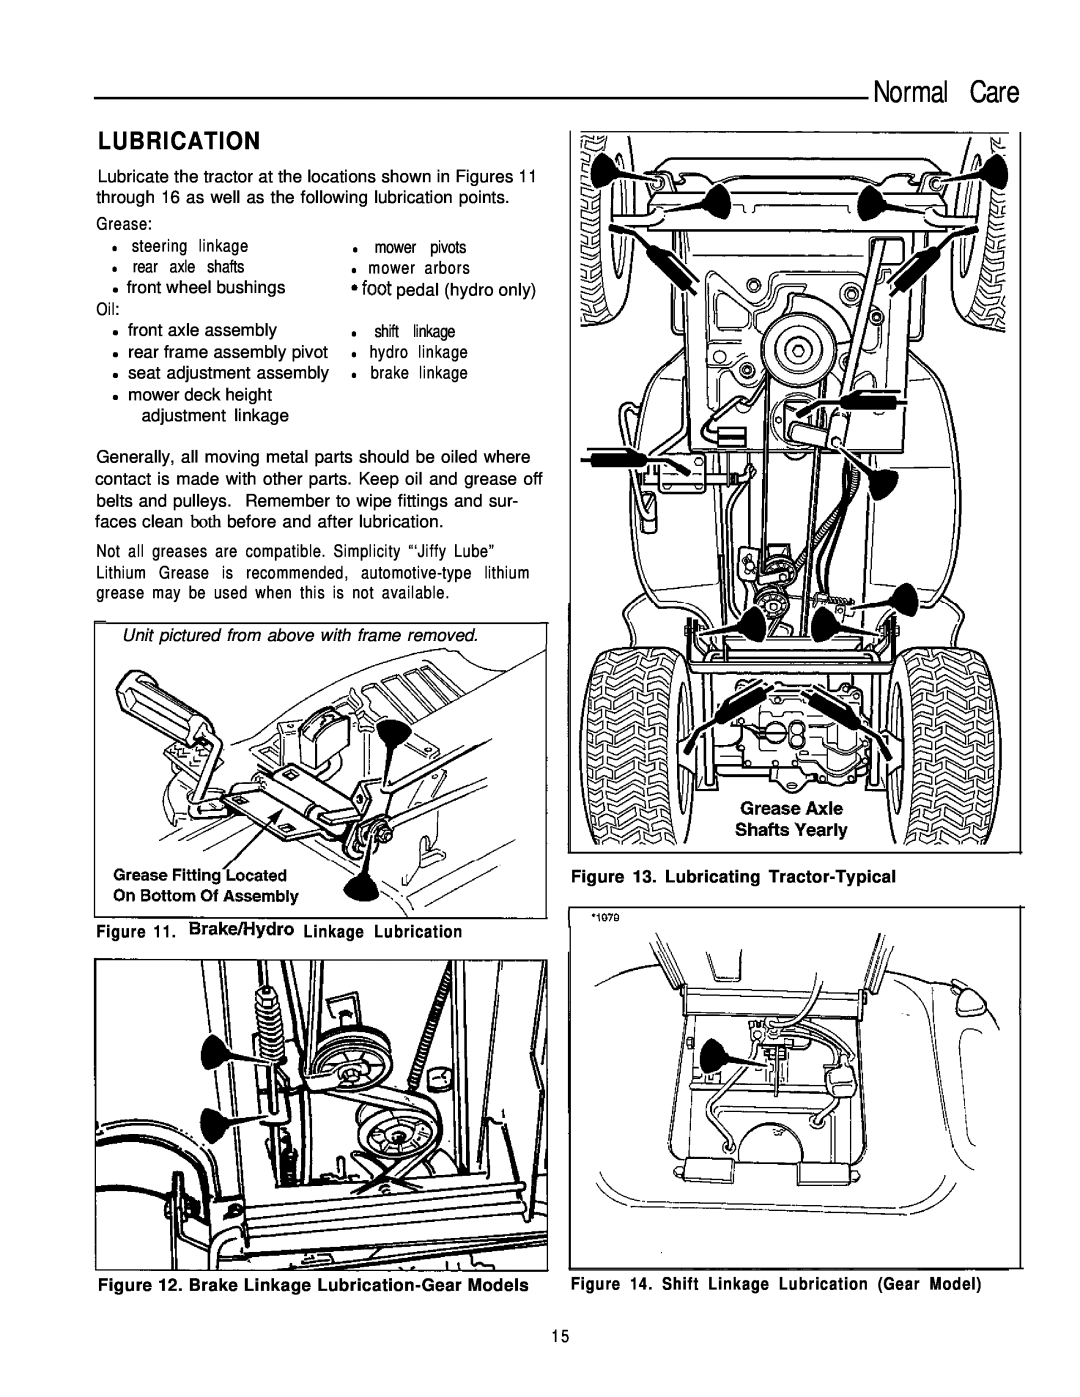 Simplicity 1693264, 1693266 manual Normal Care, Brake/!-lydro Linkage Lubrication, Lubricating Tractor-Typical 